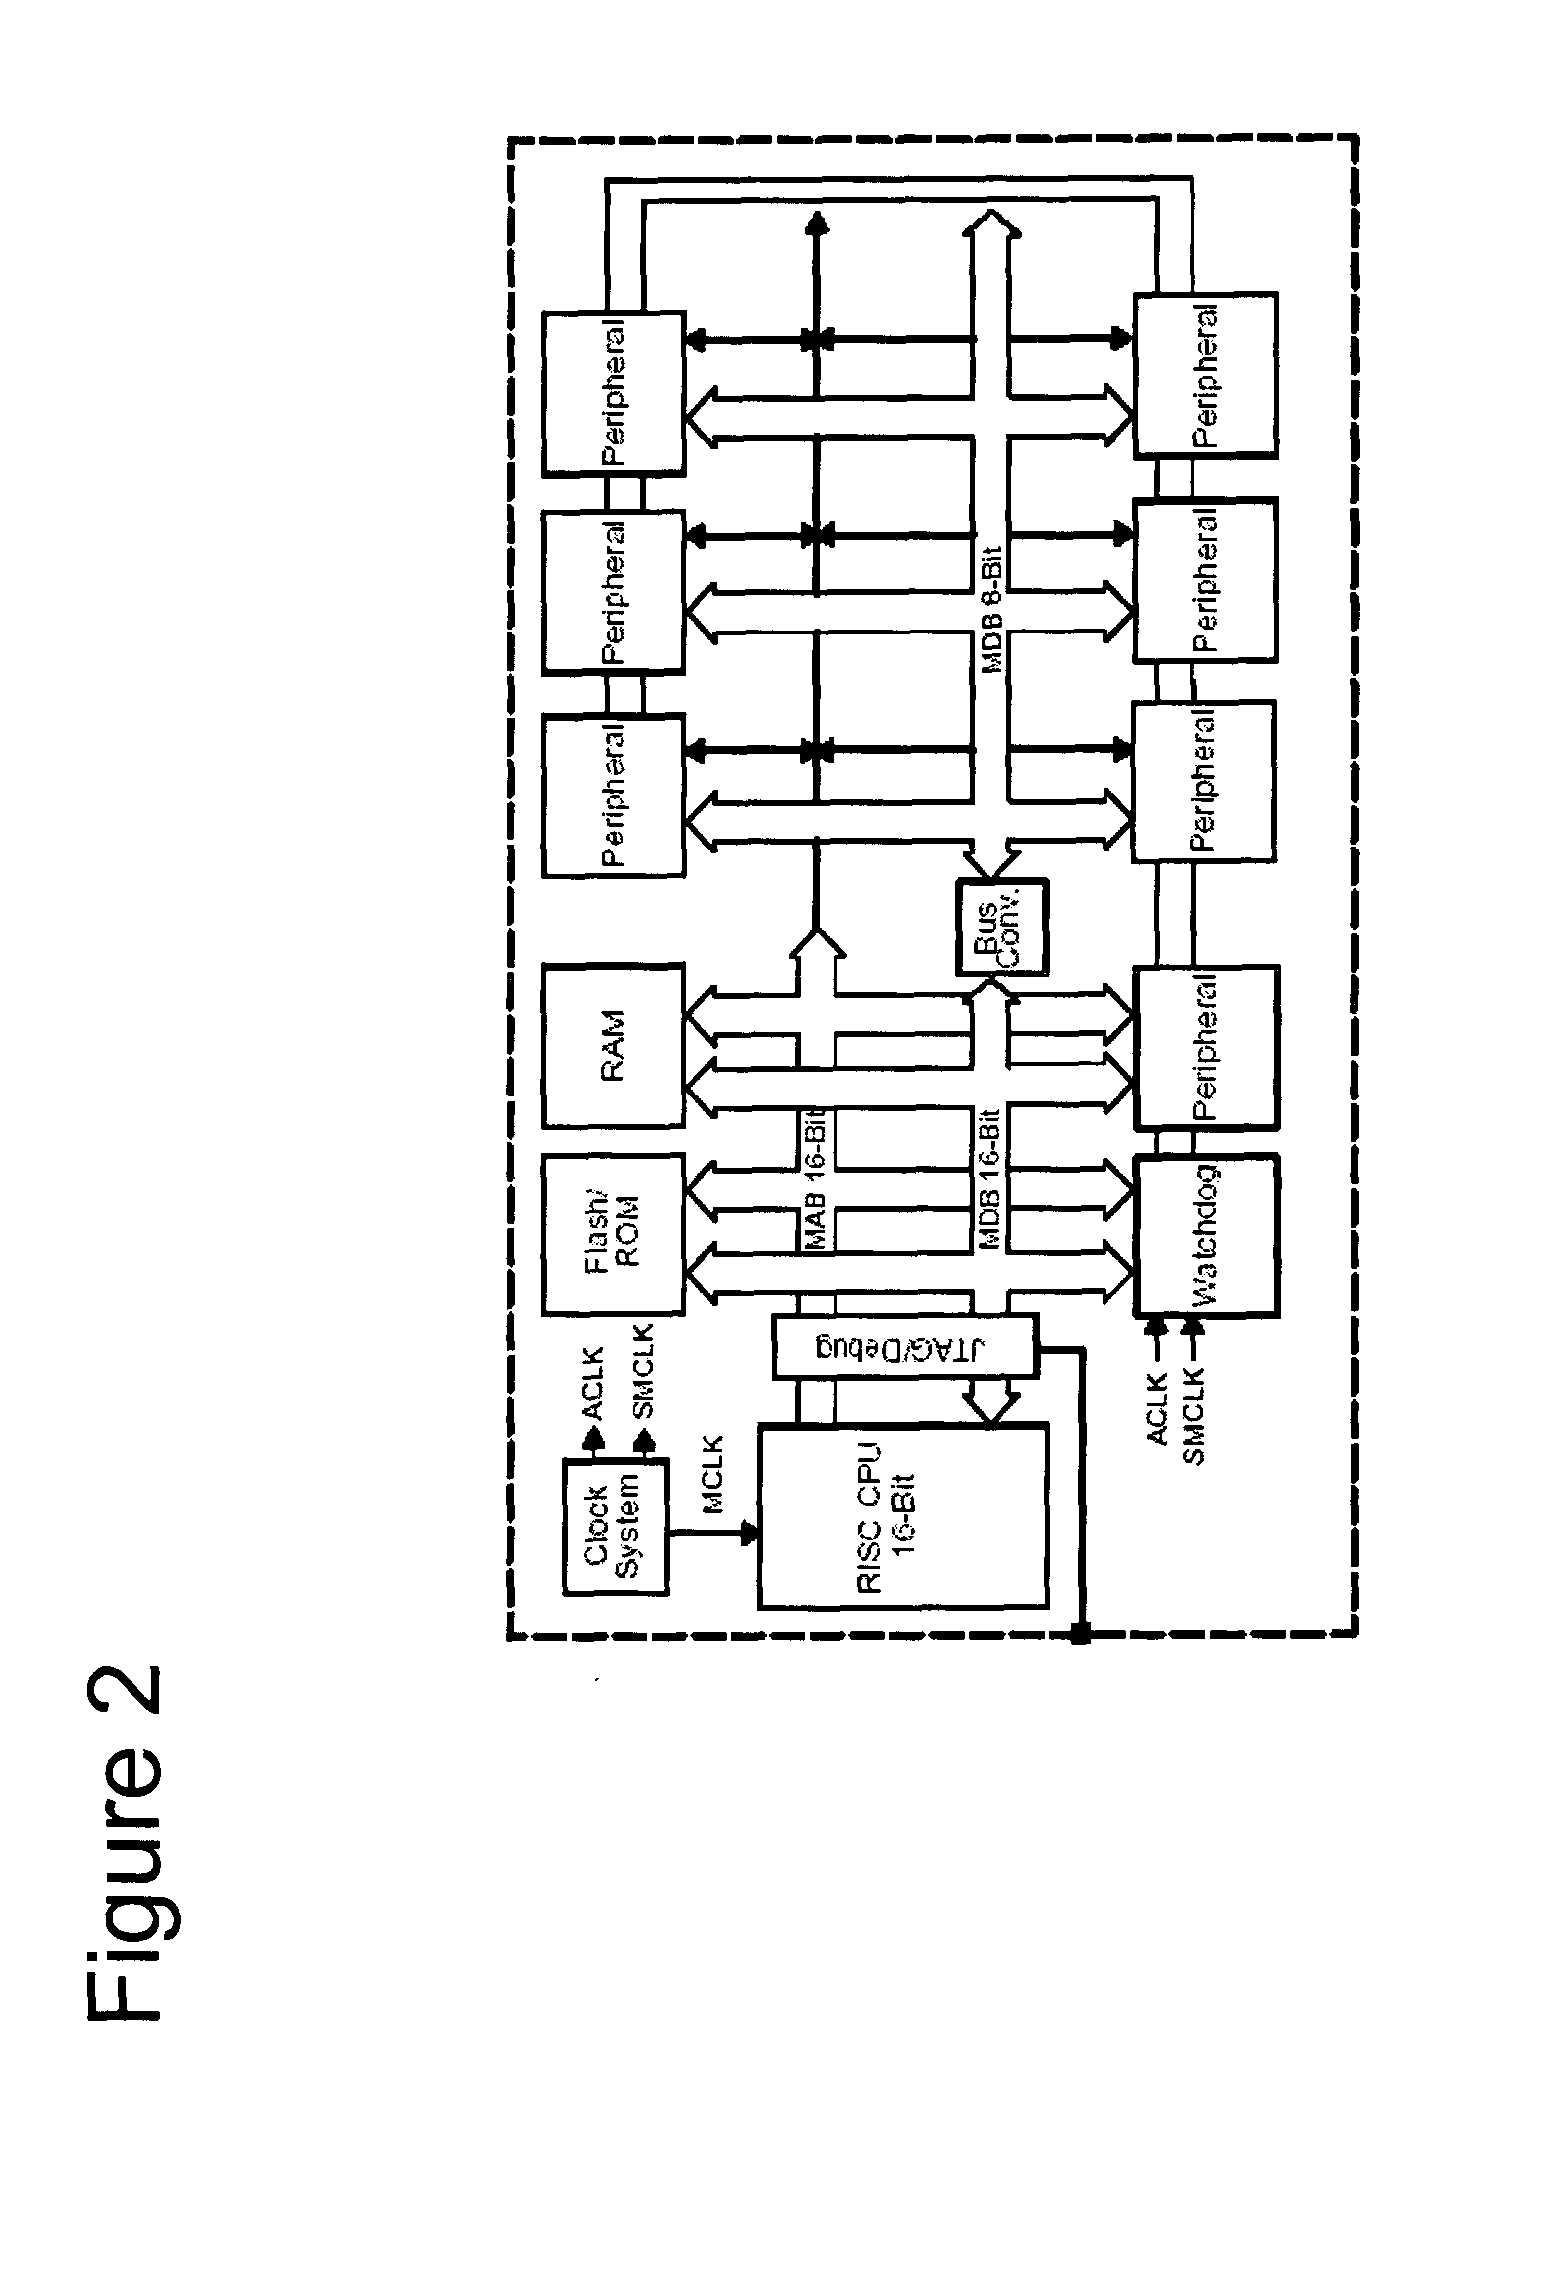 Constant current electroporation device and methods of use